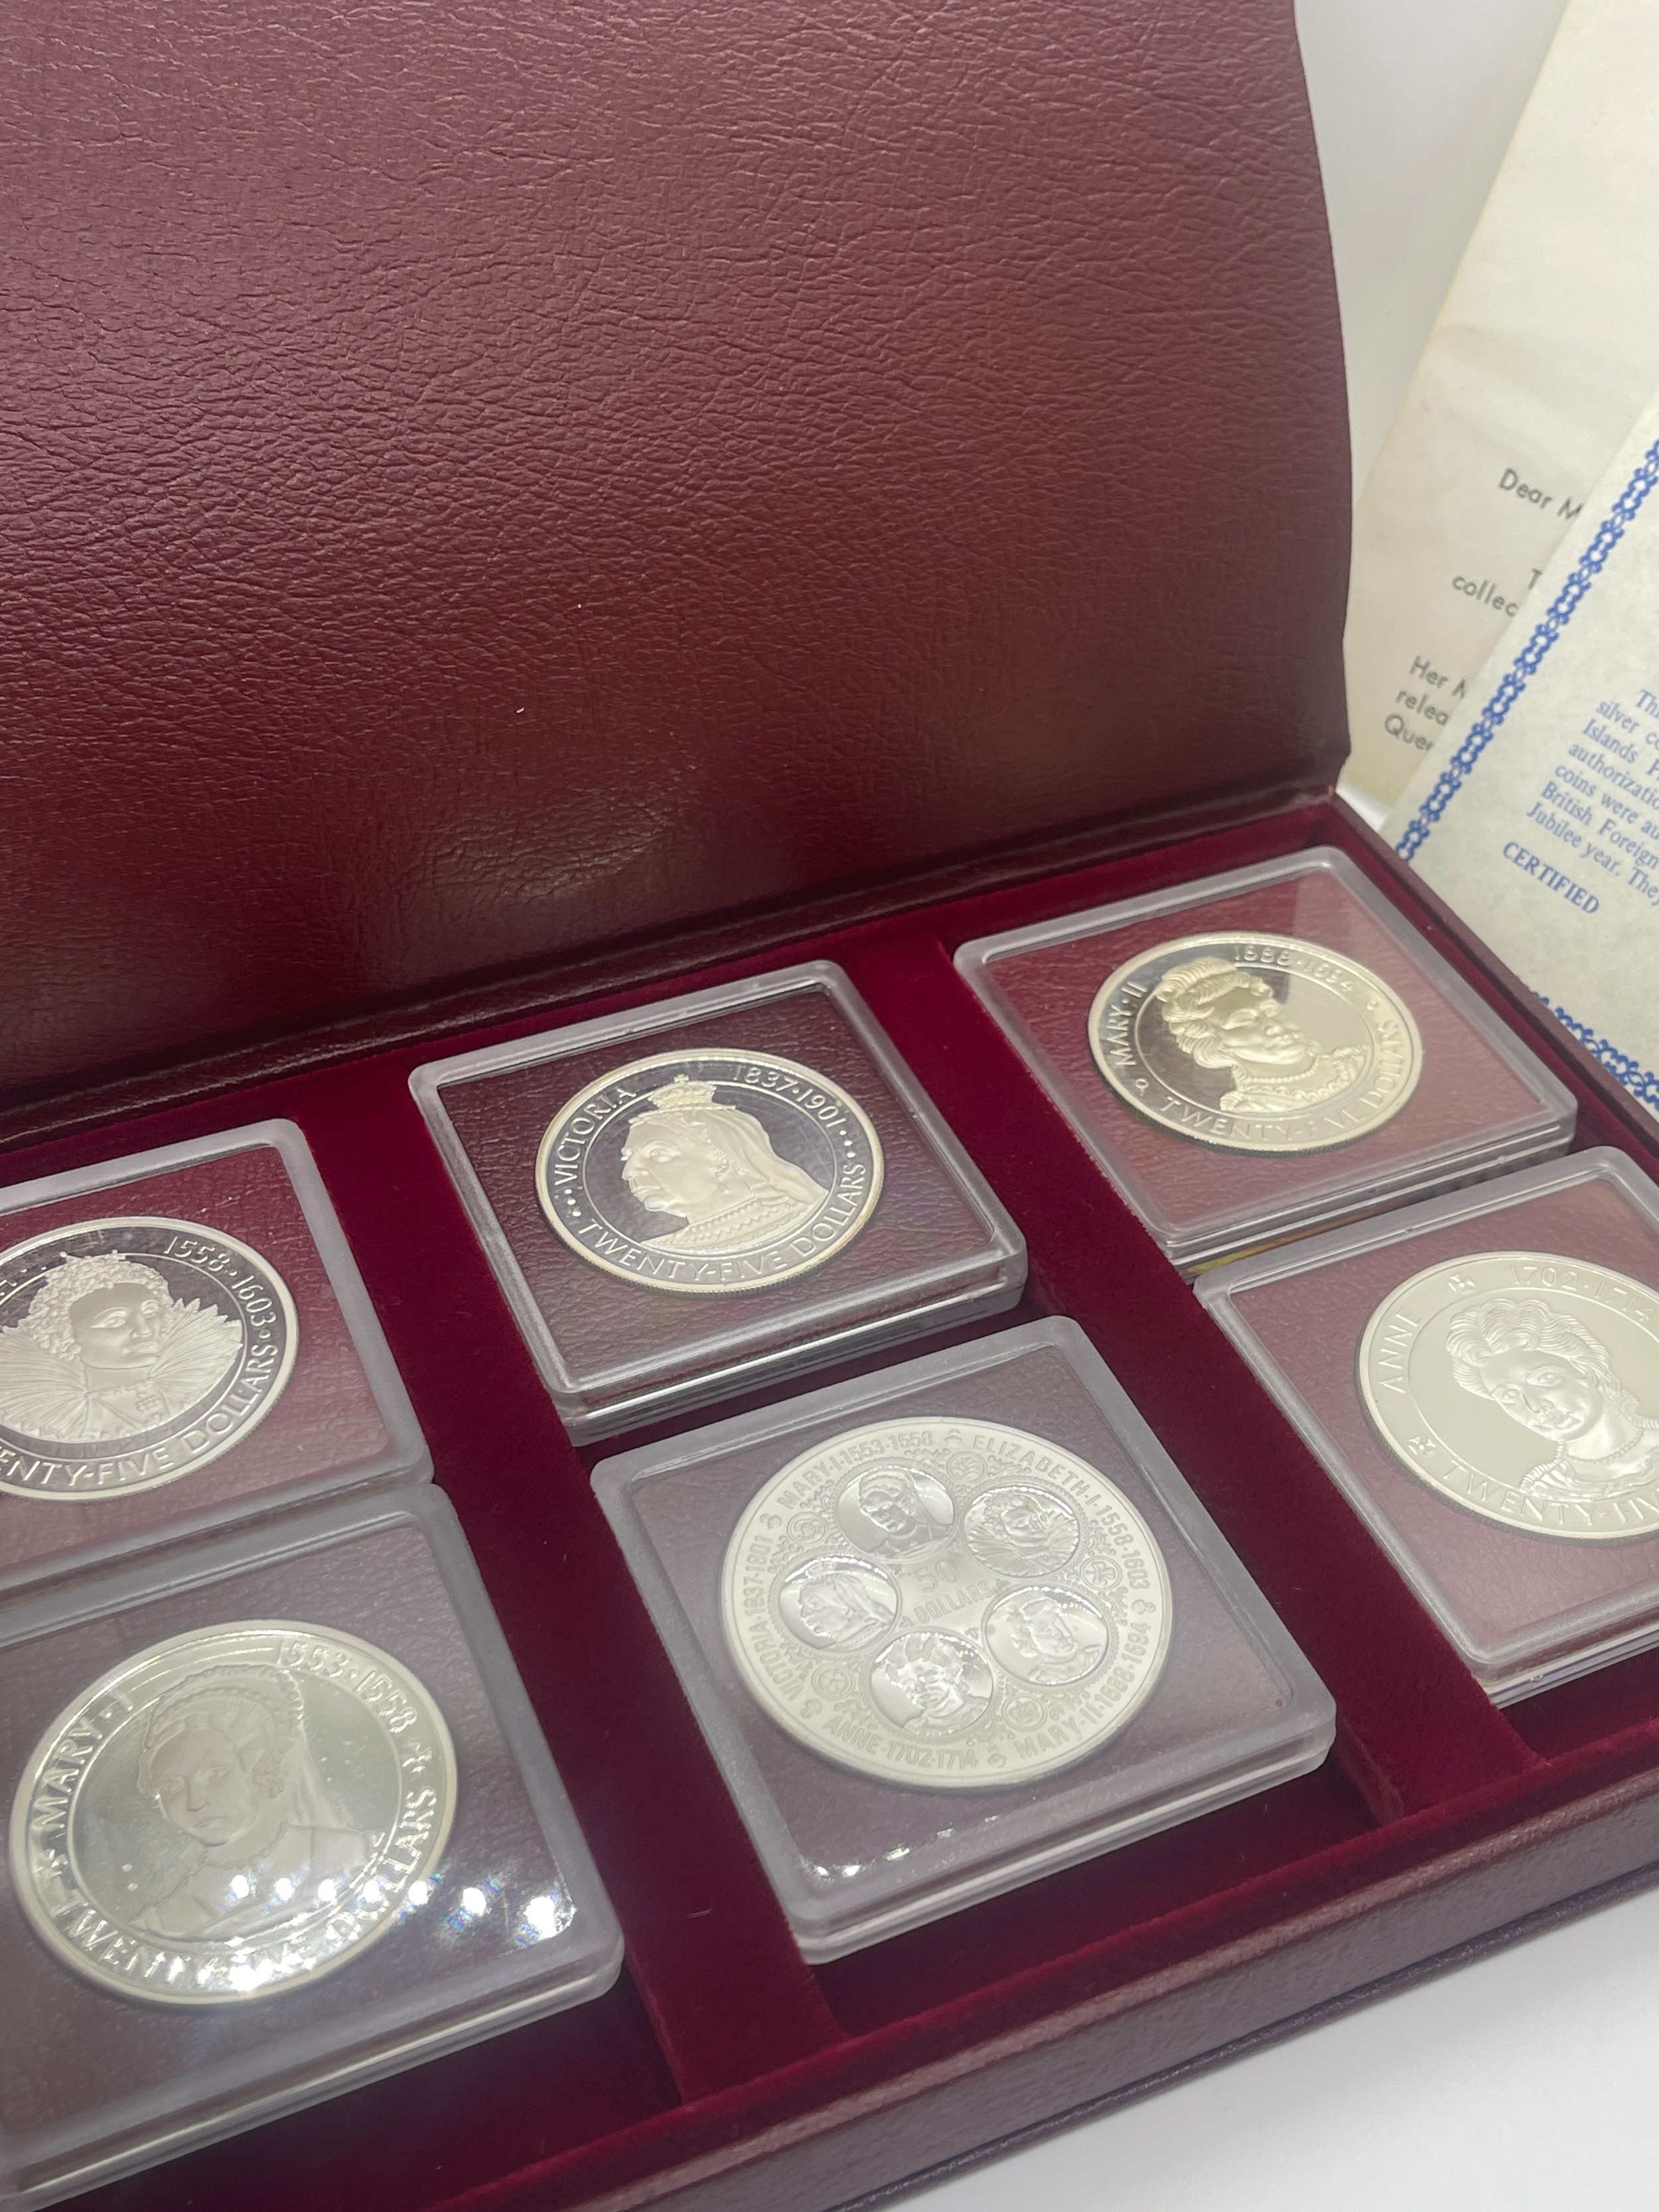 Boxed the Cayman island silver queens collection 1977 coin set with COA - Image 3 of 5